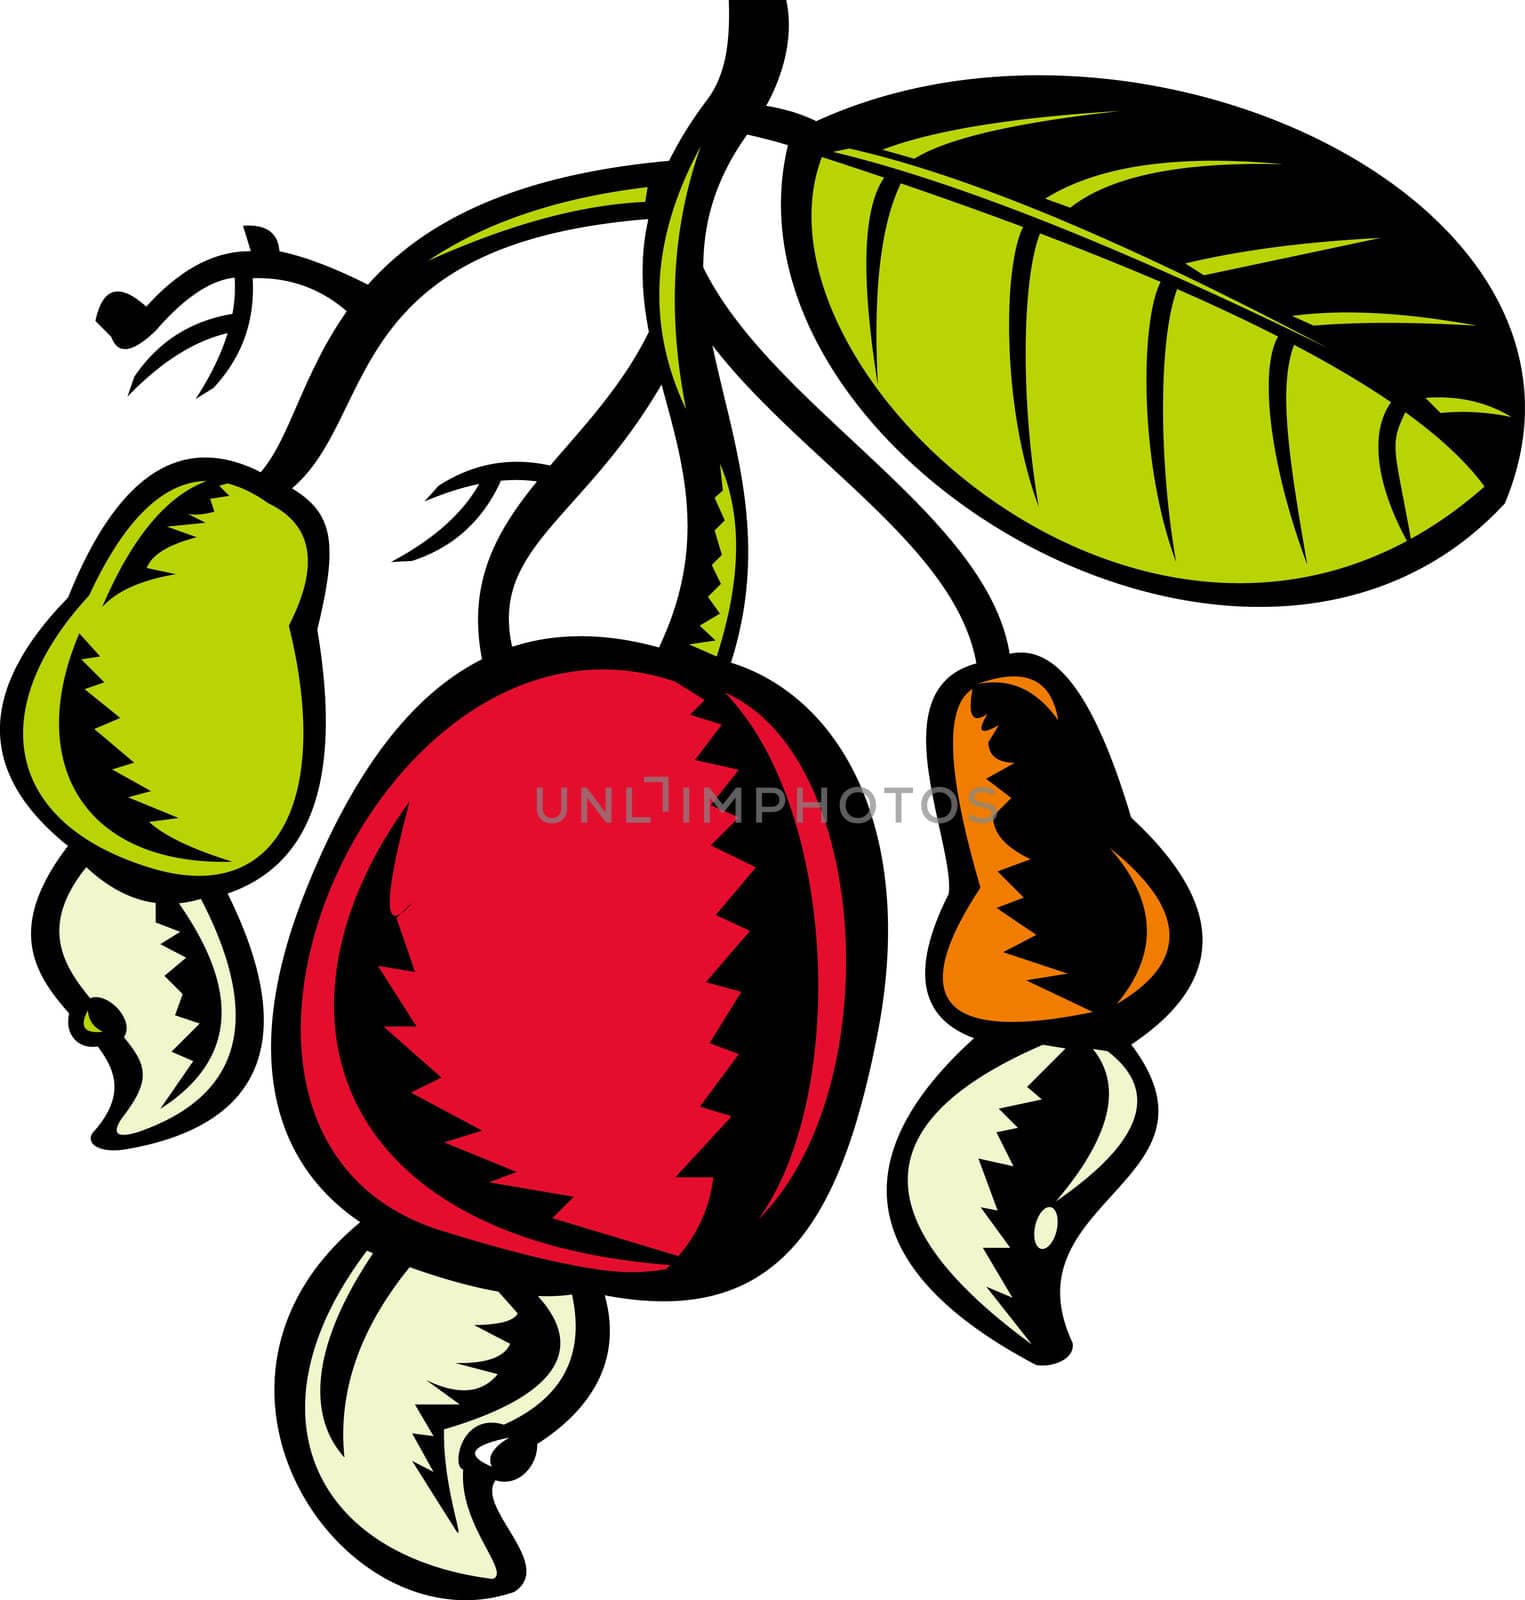 illustration of a cashew nut and fruit with leaf done in retro woodcut style isolated on white